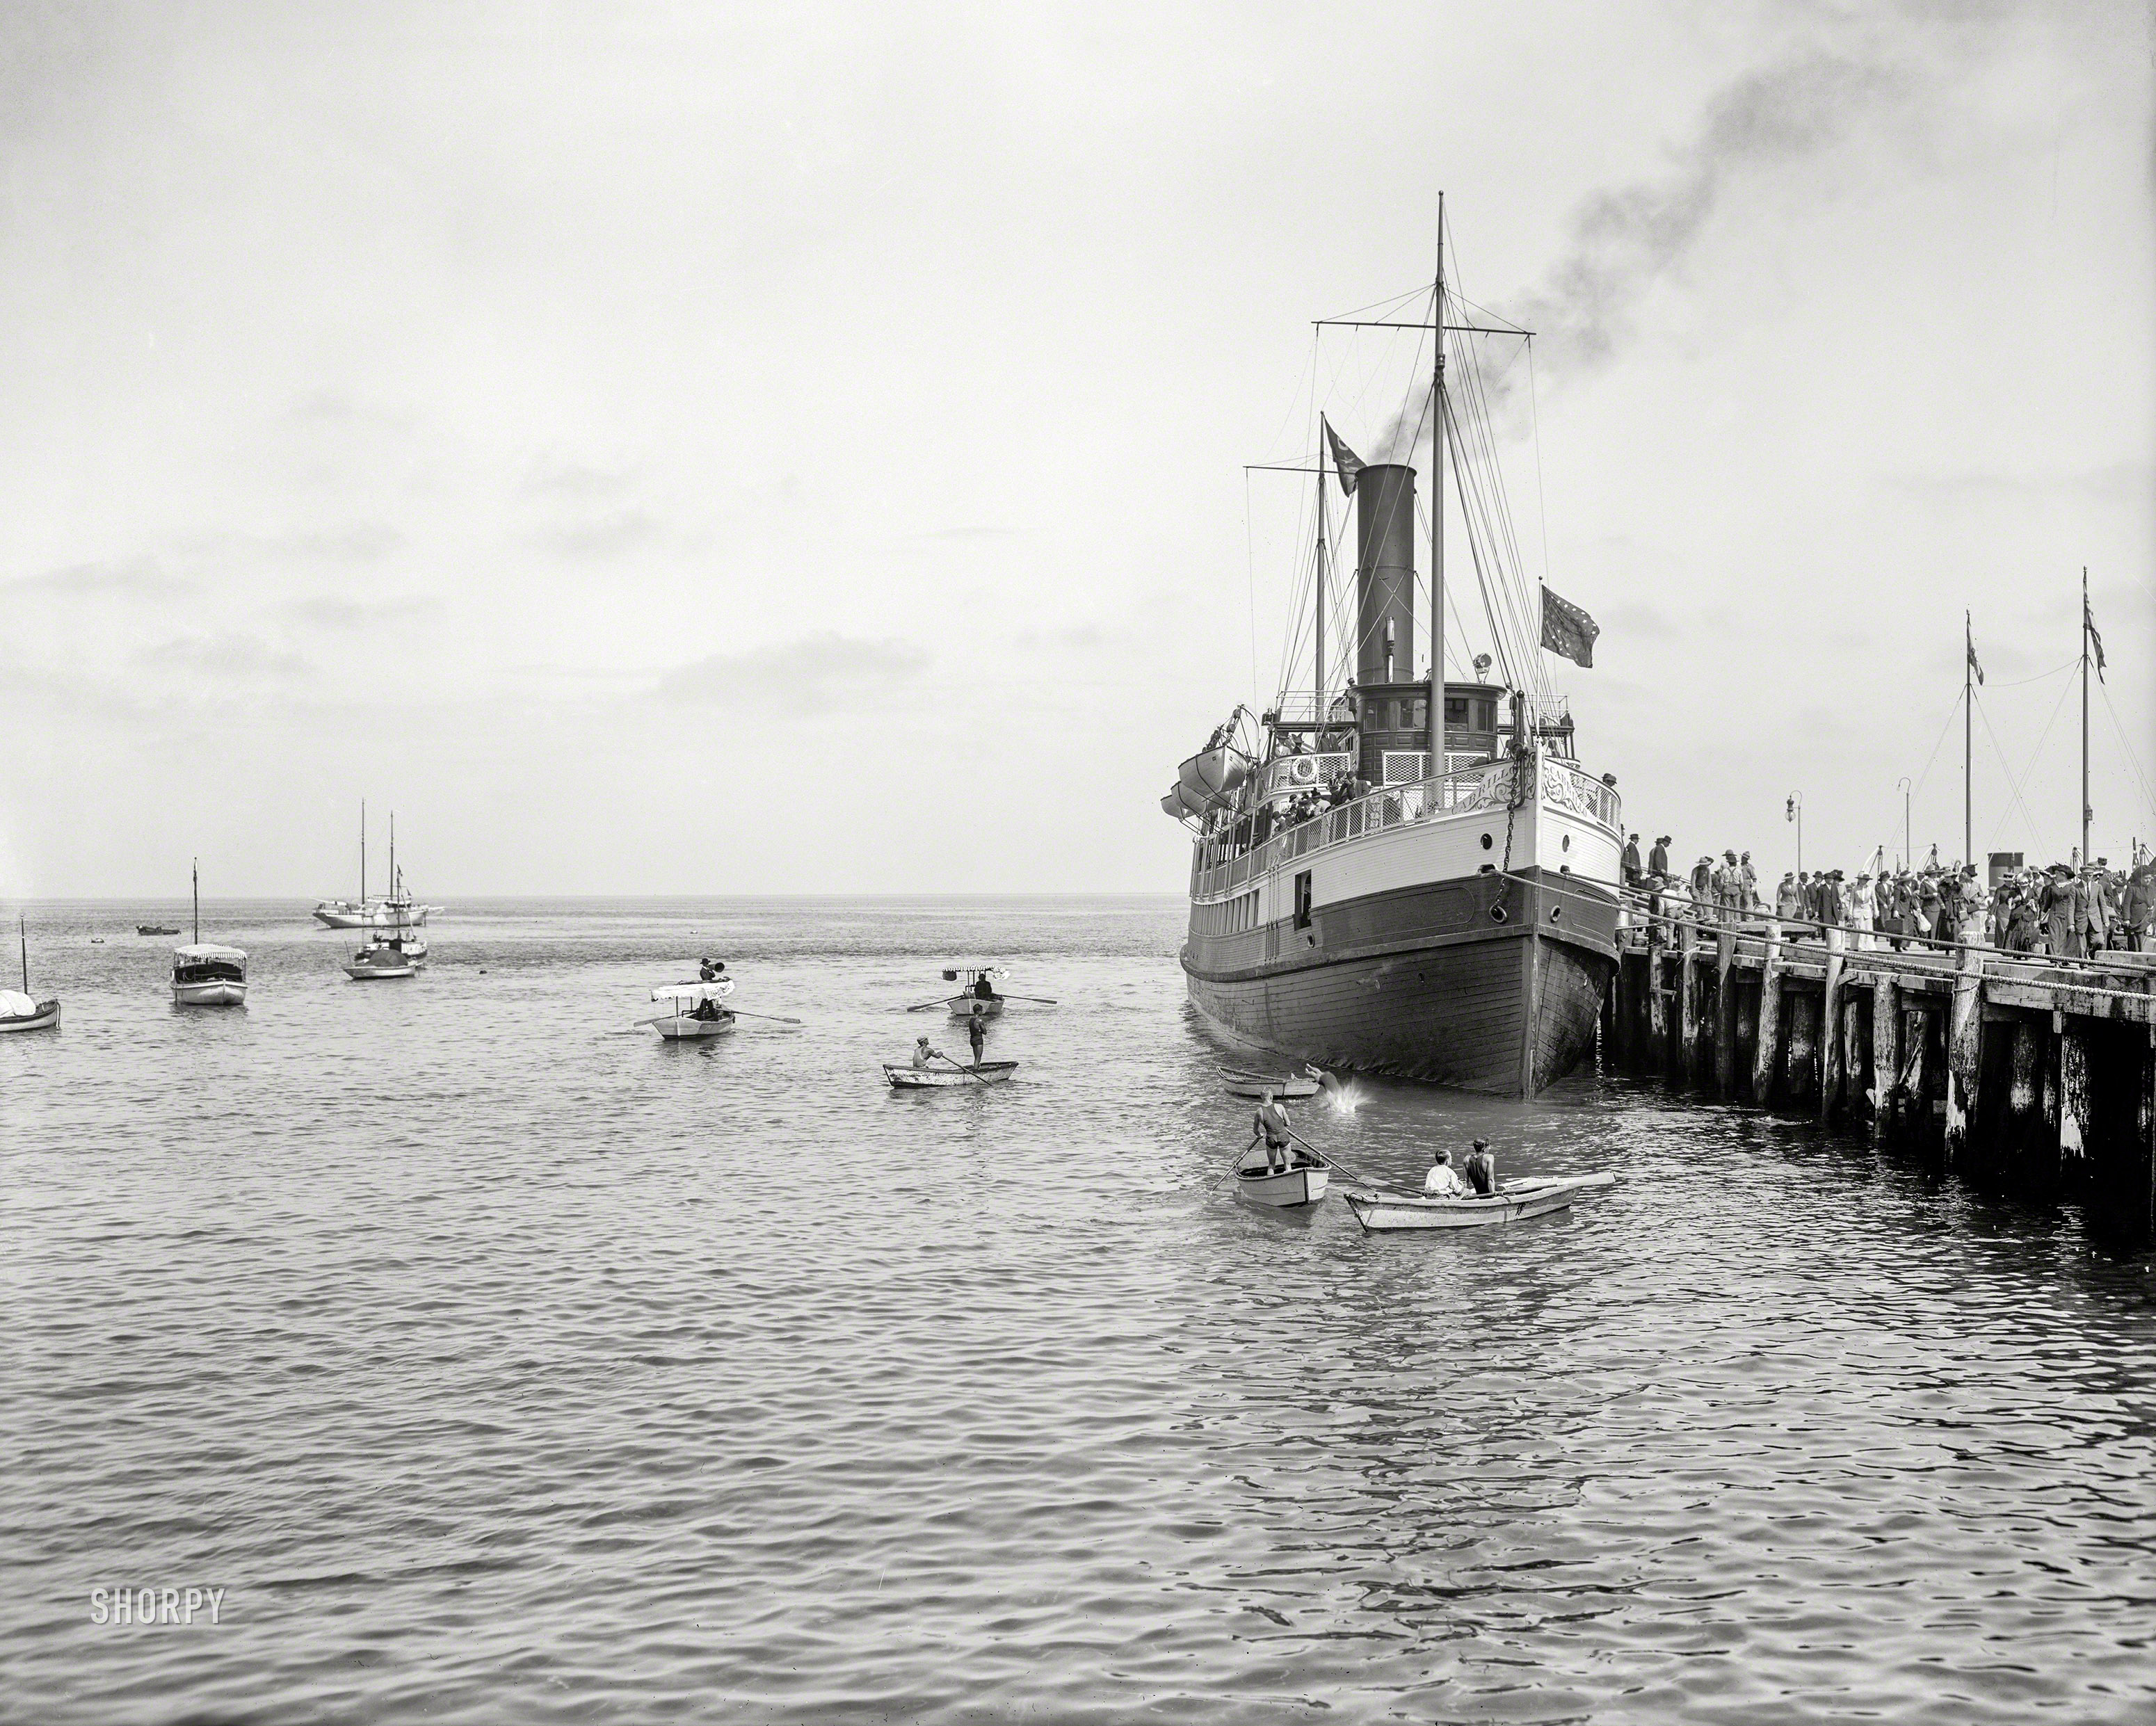 Circa 1910. "Steamer Cabrillo at dock, probably in Southern California." 8x10 inch dry plate glass negative, Detroit Publishing Company. View full size.